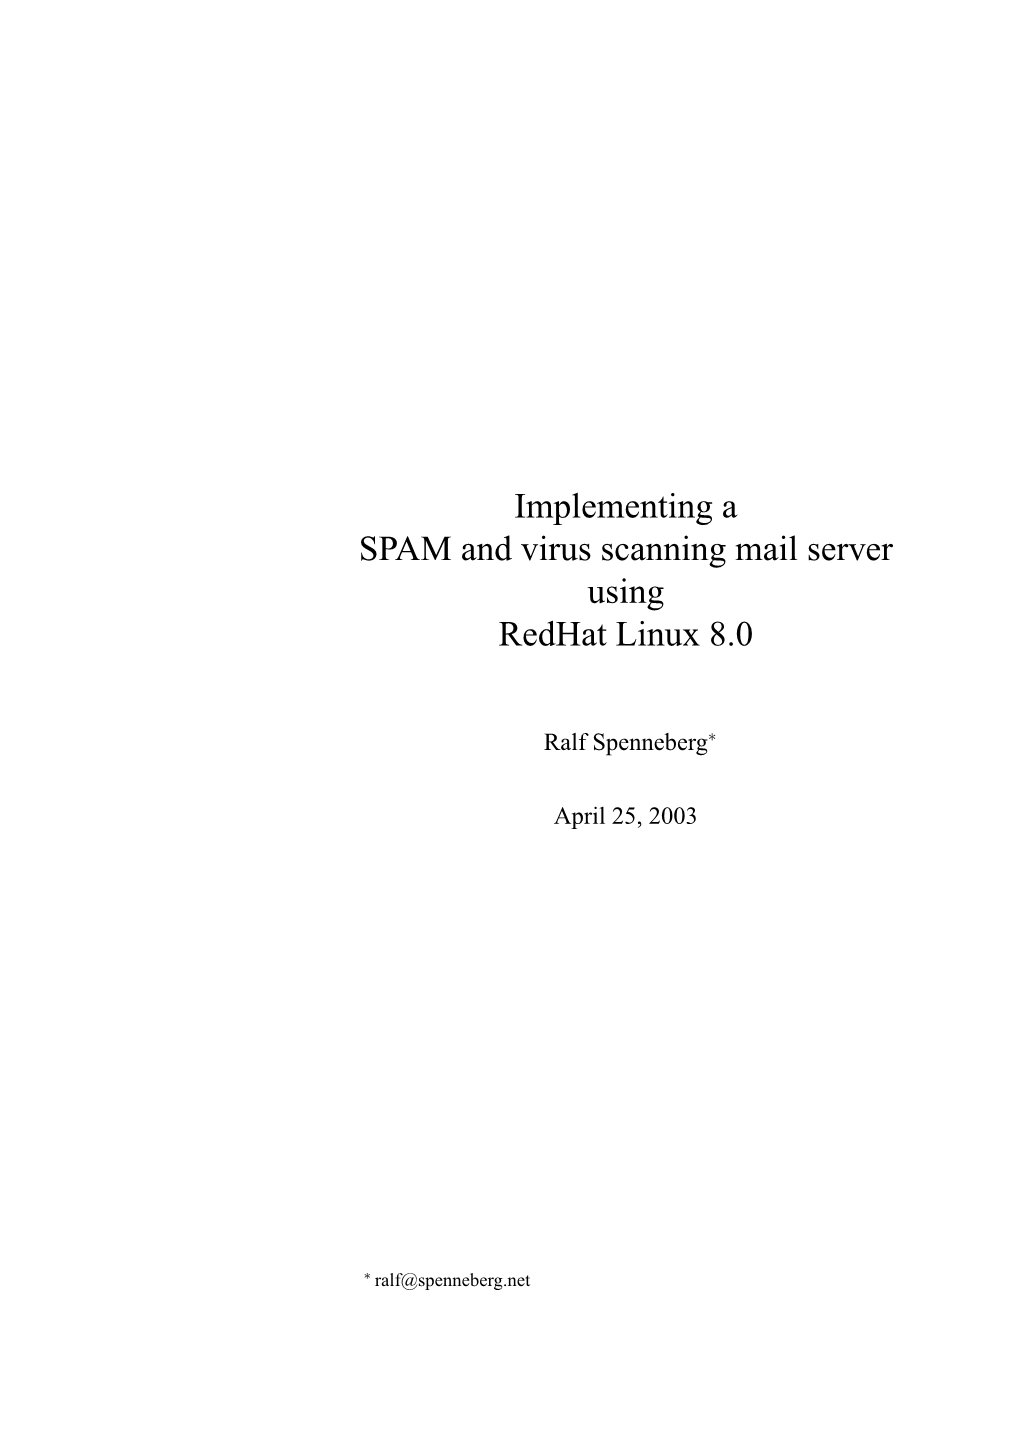 Implementing a SPAM and Virus Scanning Mail Server Using Redhat Linux 8.0